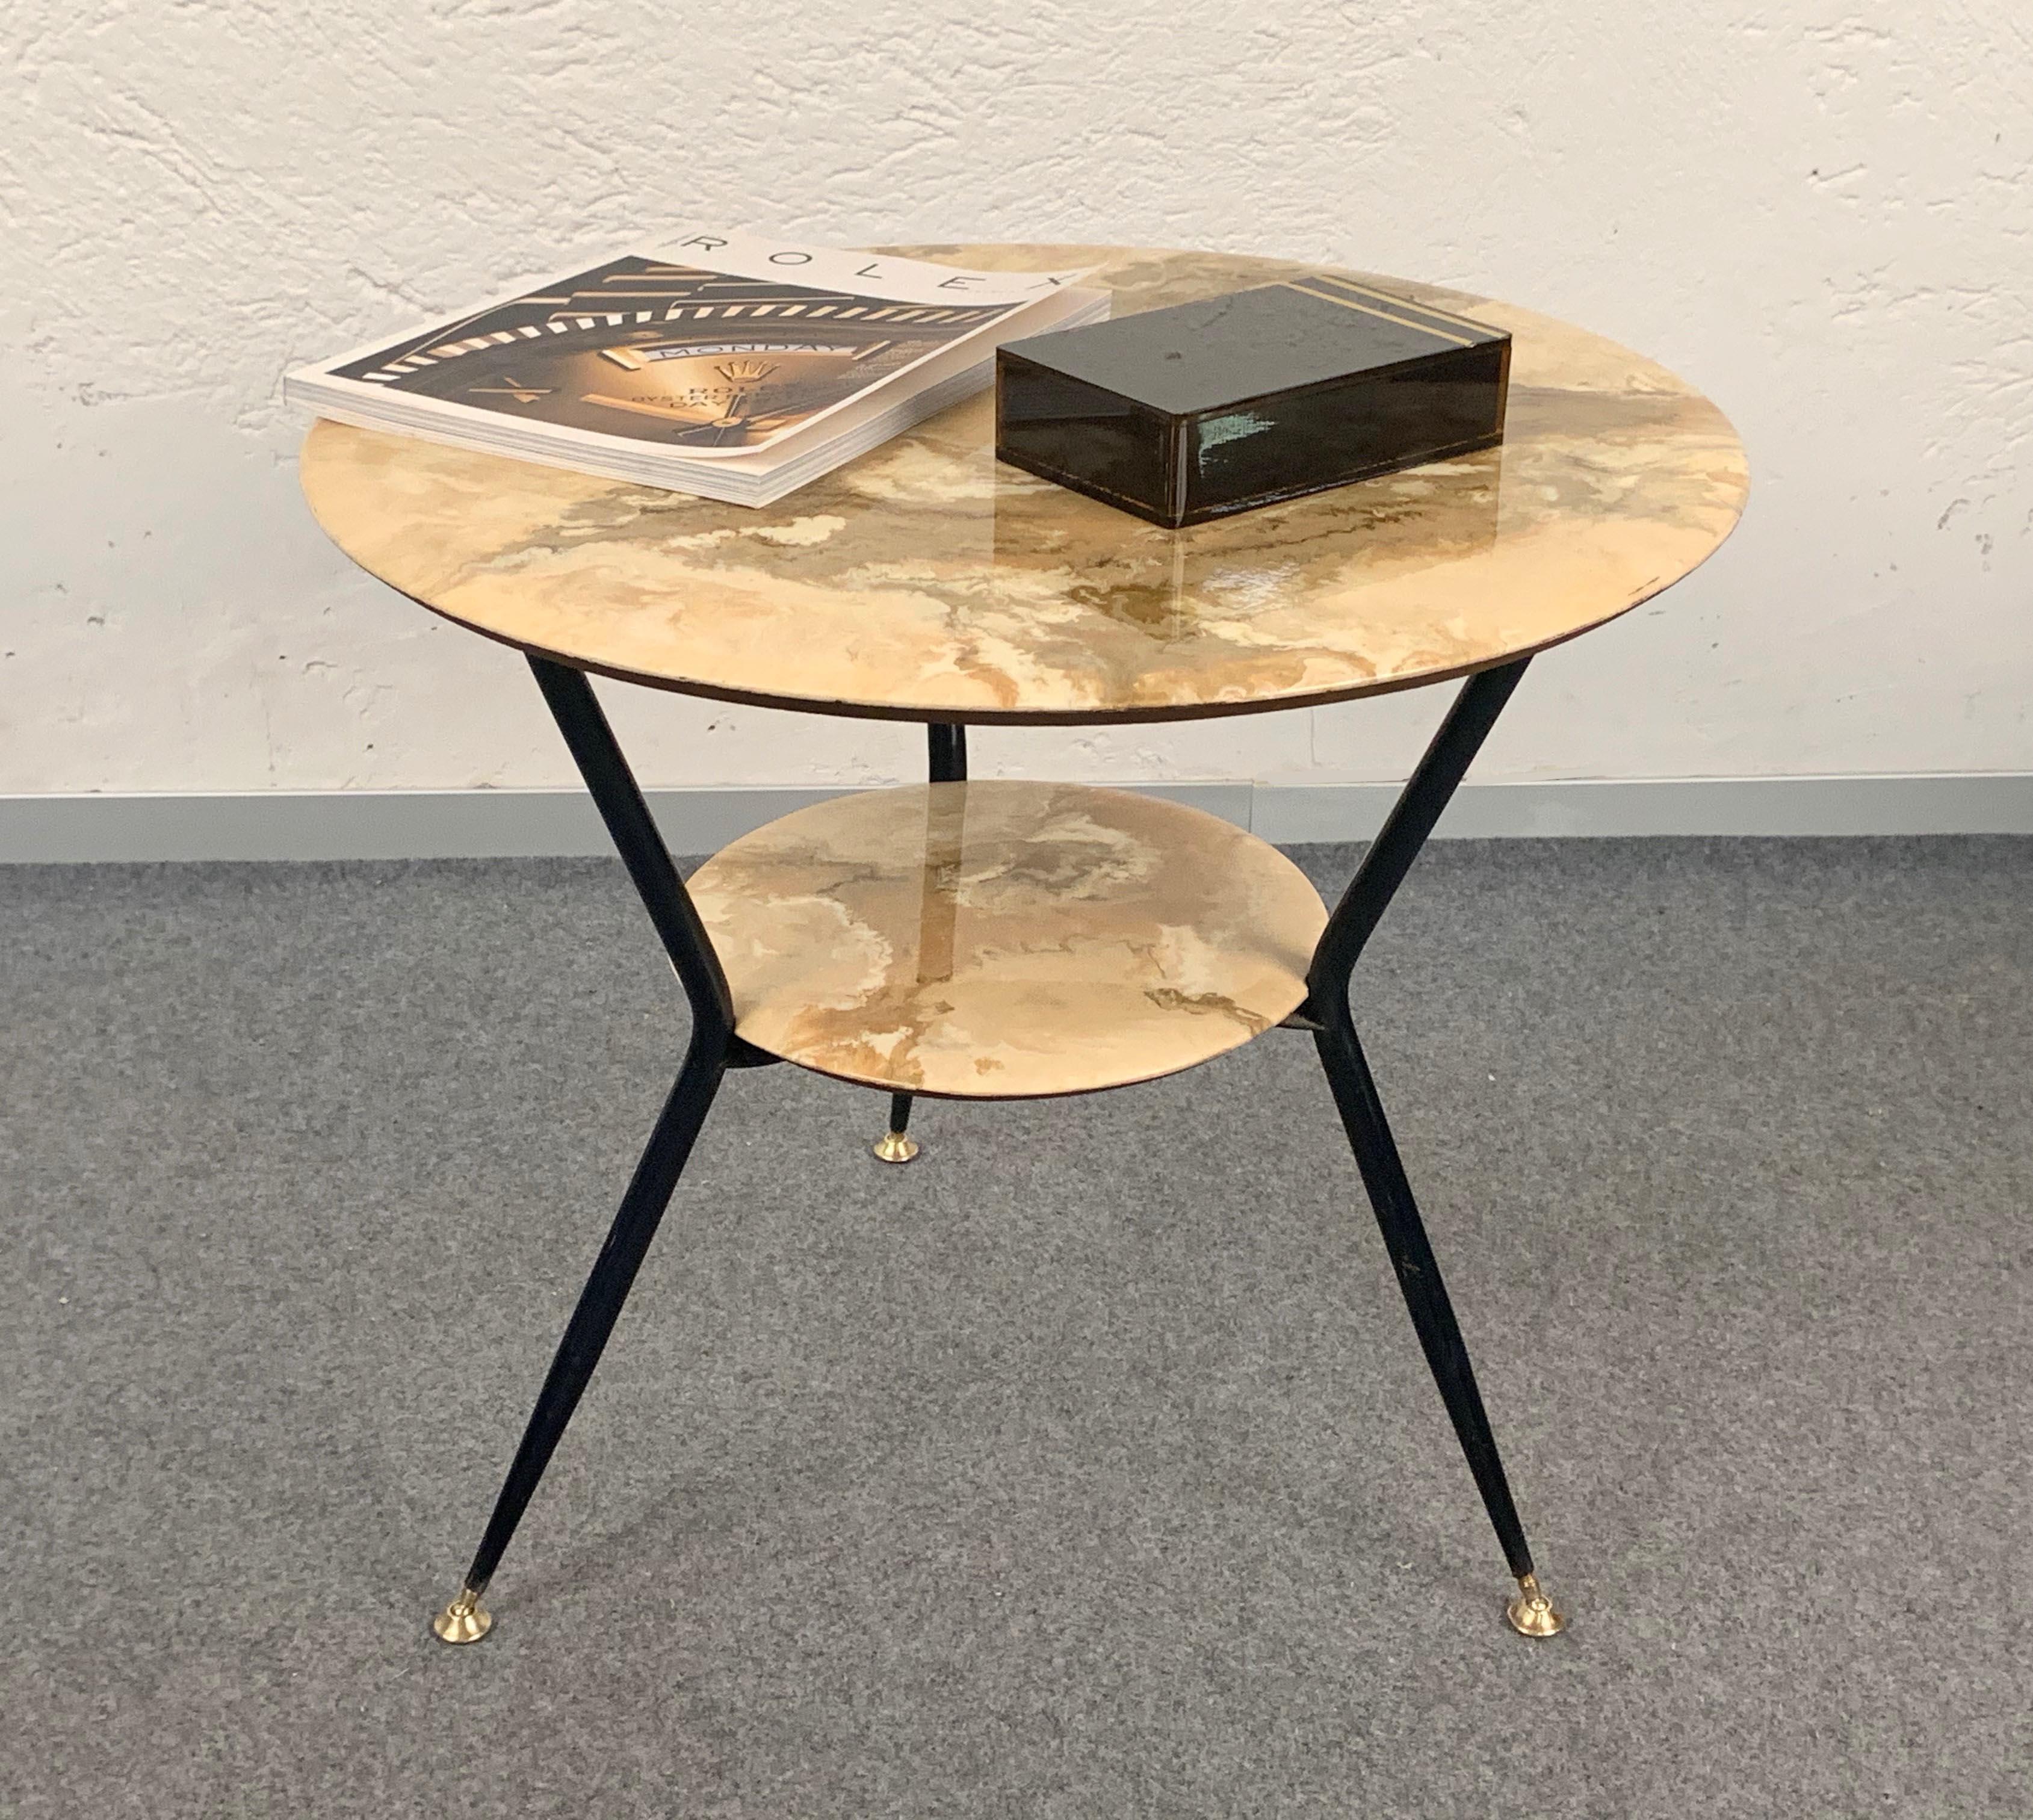 Varnished Round Marbled Wood Coffee Double Level Italian Table with Brass Feet, 1950s